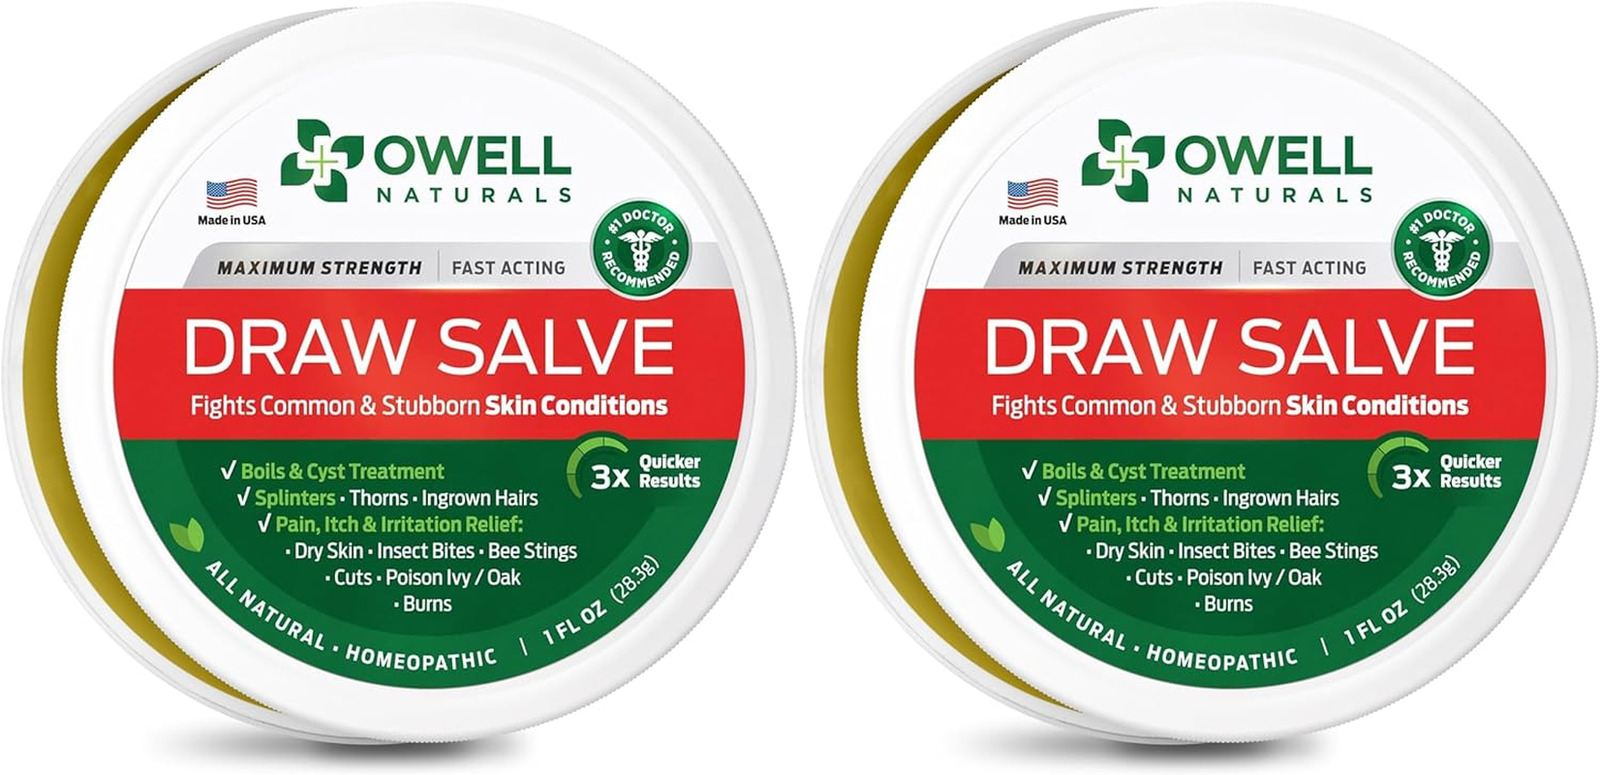 OWELL NATURALS Drawing Salve Ointment - 2 oz - Ingrown Hair, Boil & Cyst Treatme